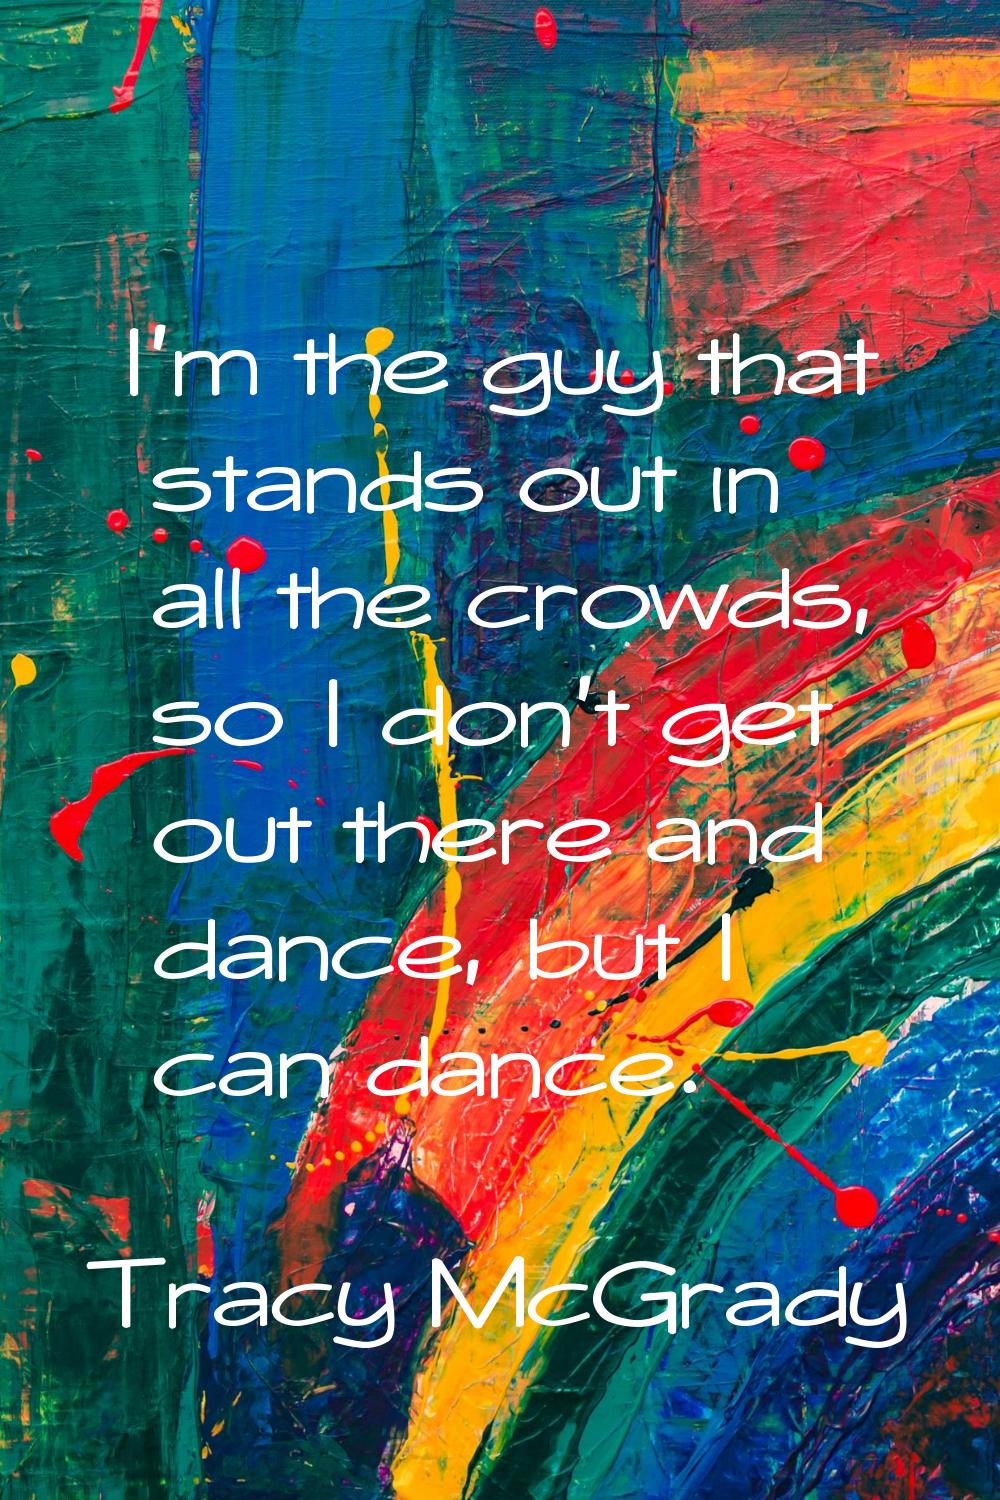 I'm the guy that stands out in all the crowds, so I don't get out there and dance, but I can dance.